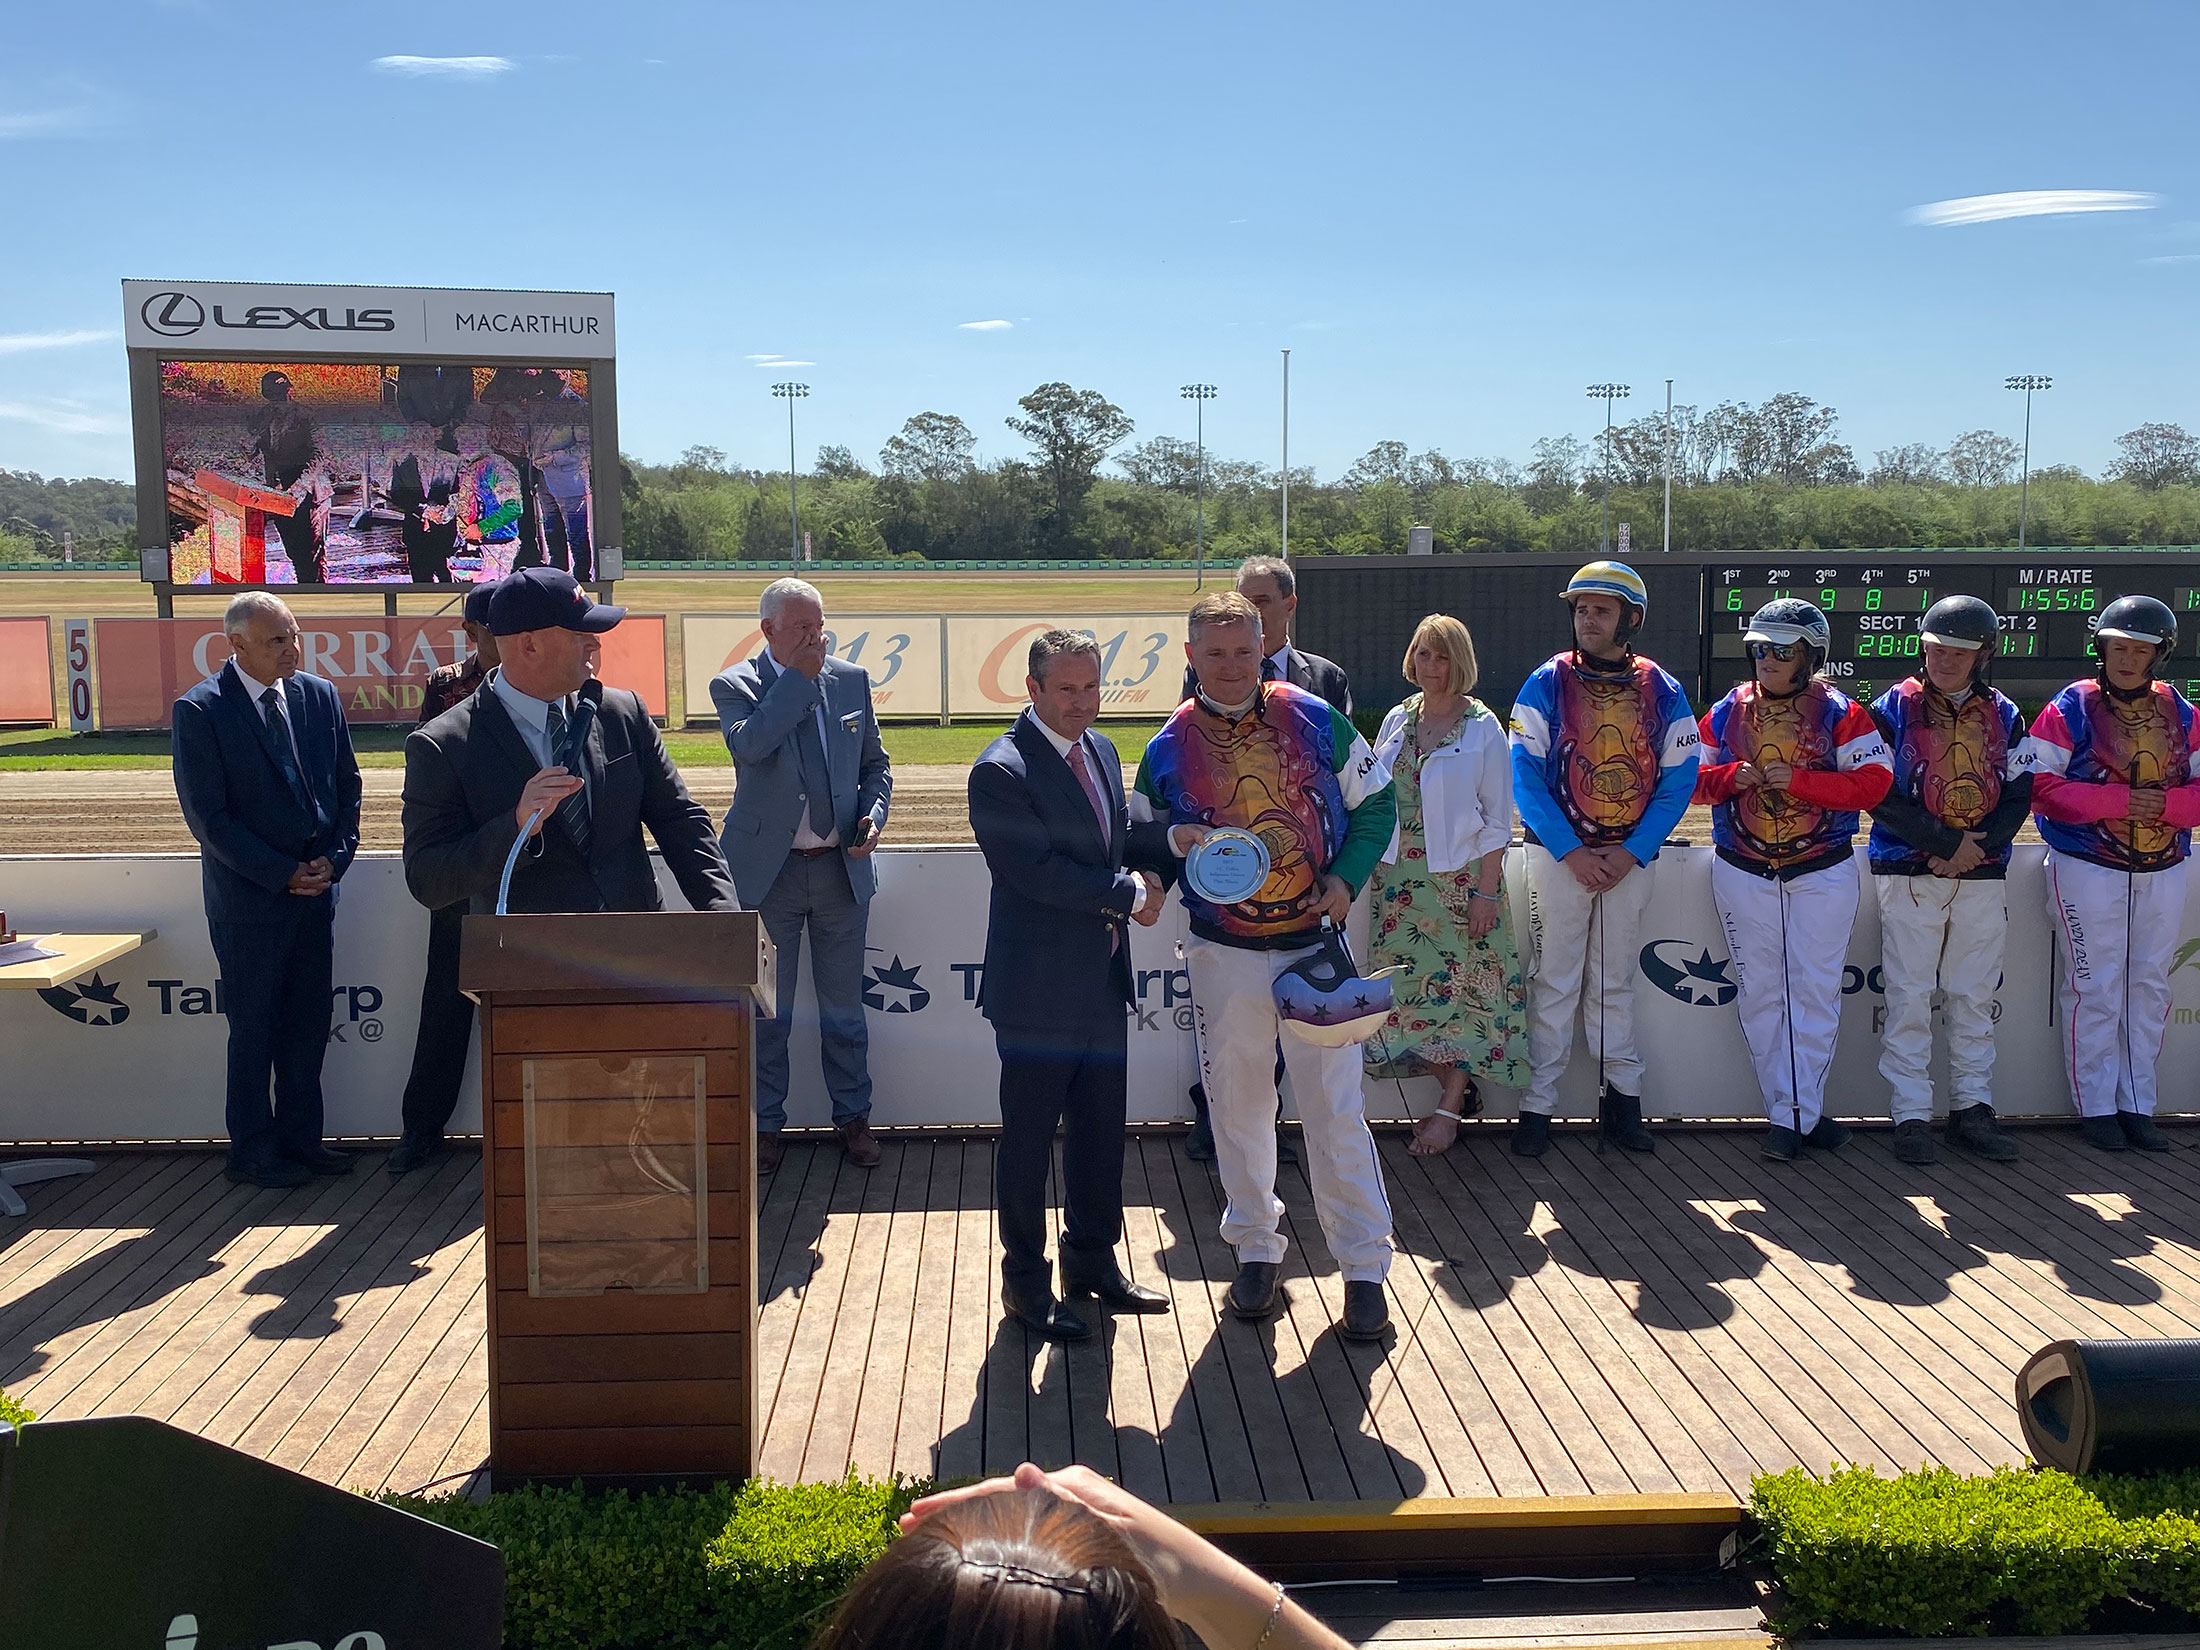 Club Menangle, Indigenous Driver Series, JC Caffyn Plate, JC Caffyn, Indigenous, Harness Racing, KARI Foundation, KARI, Indigenous Community, Indigenous, Aboriginal, Harness Racing NSW